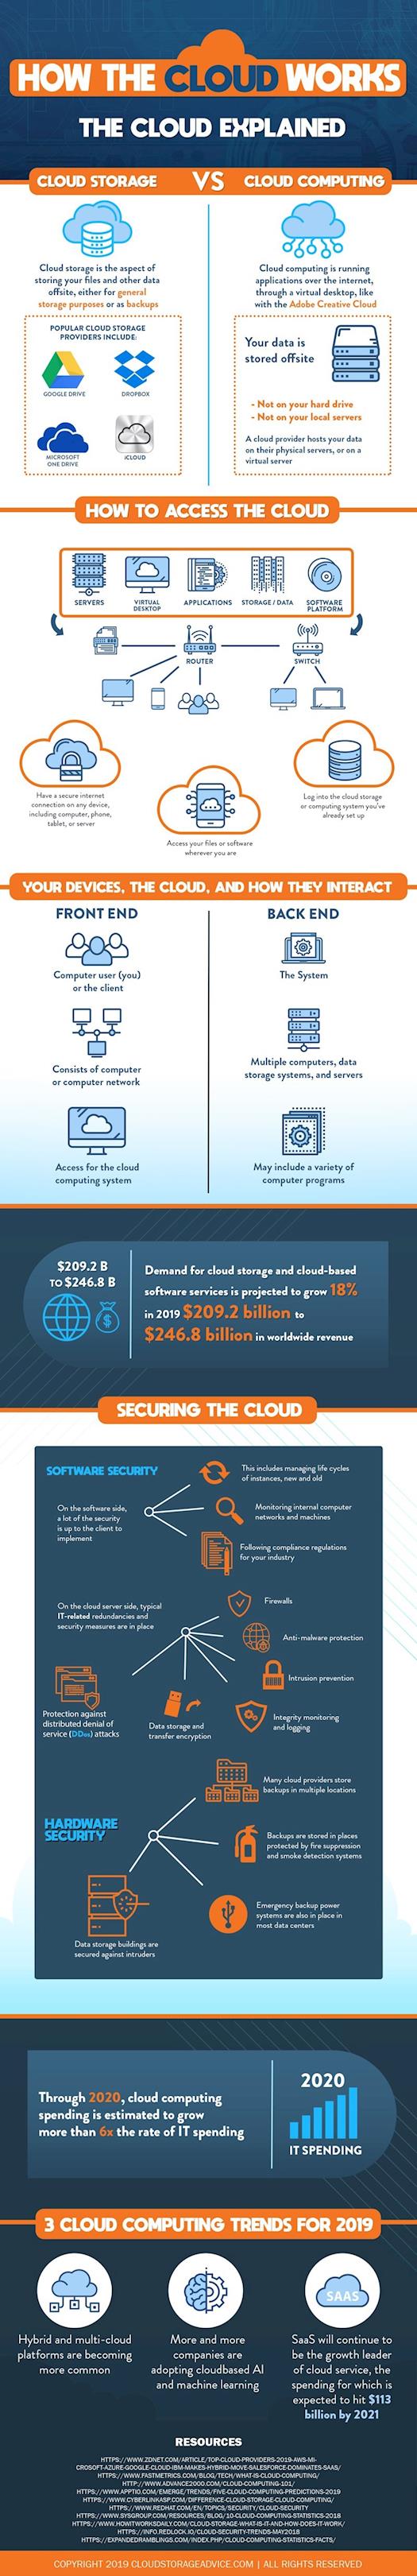 How the Cloud Works: The Cloud Explained